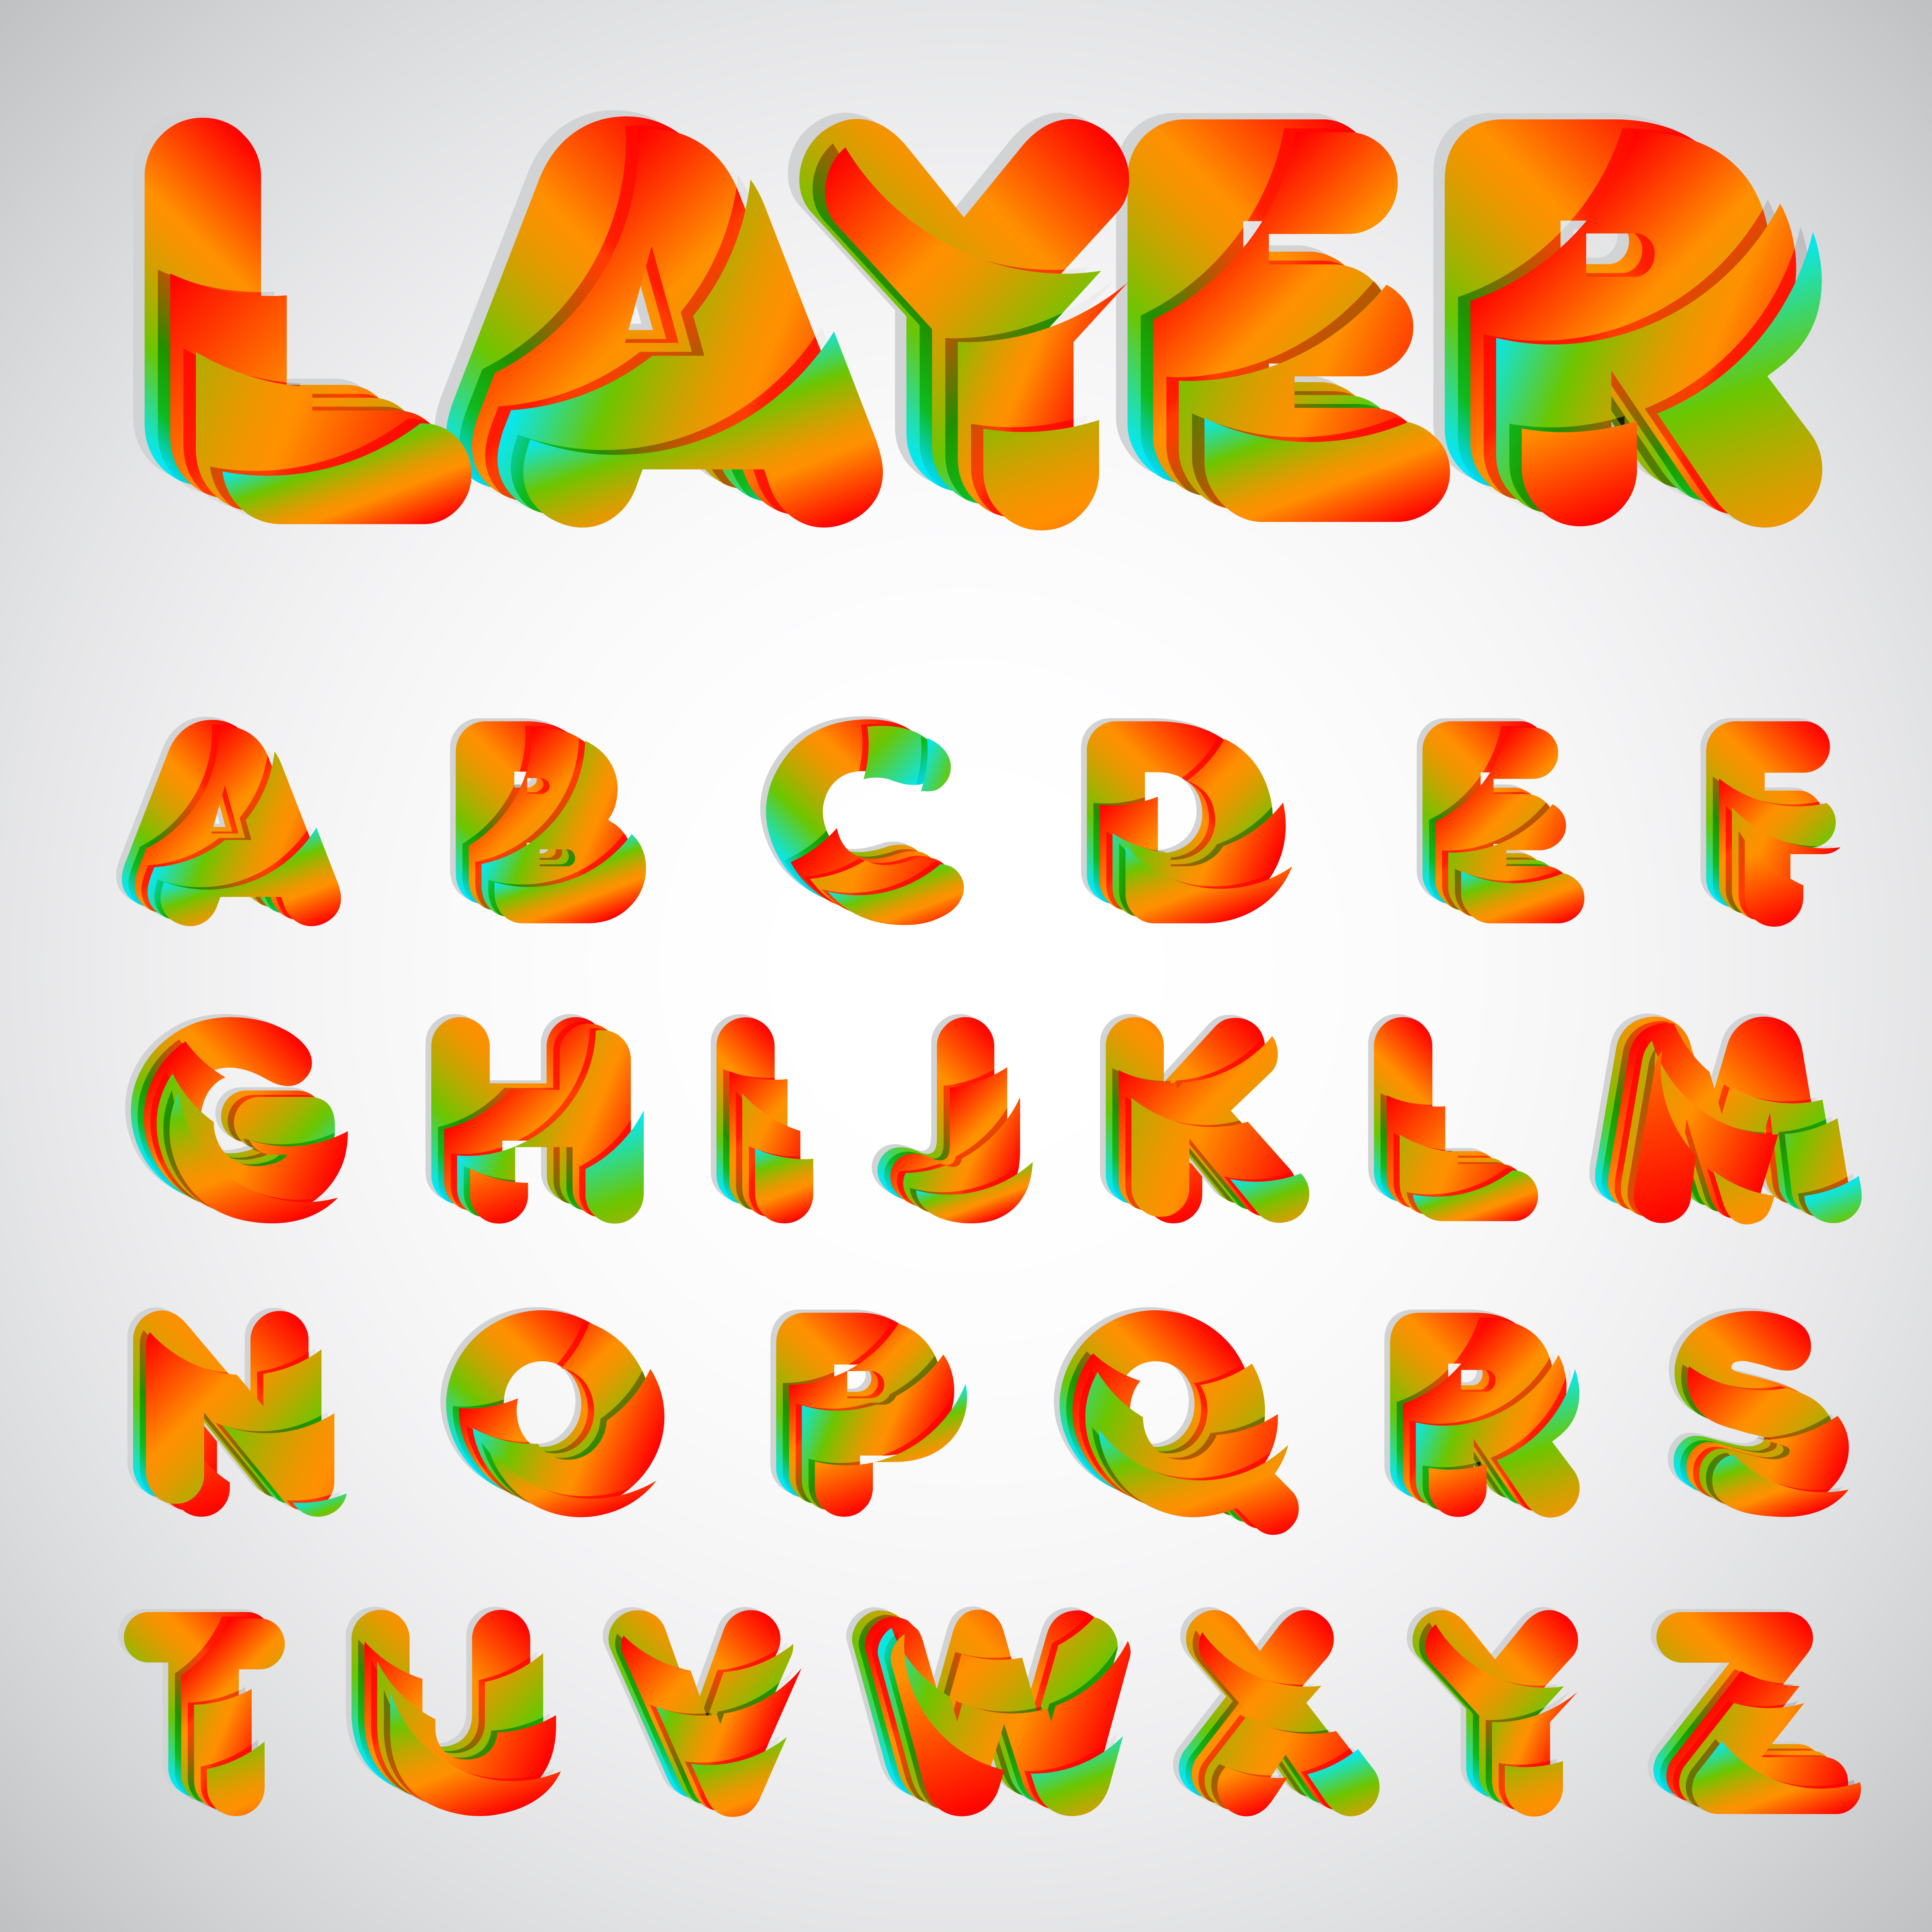 Download Layered colorful font, vector illustration - Download Free ...